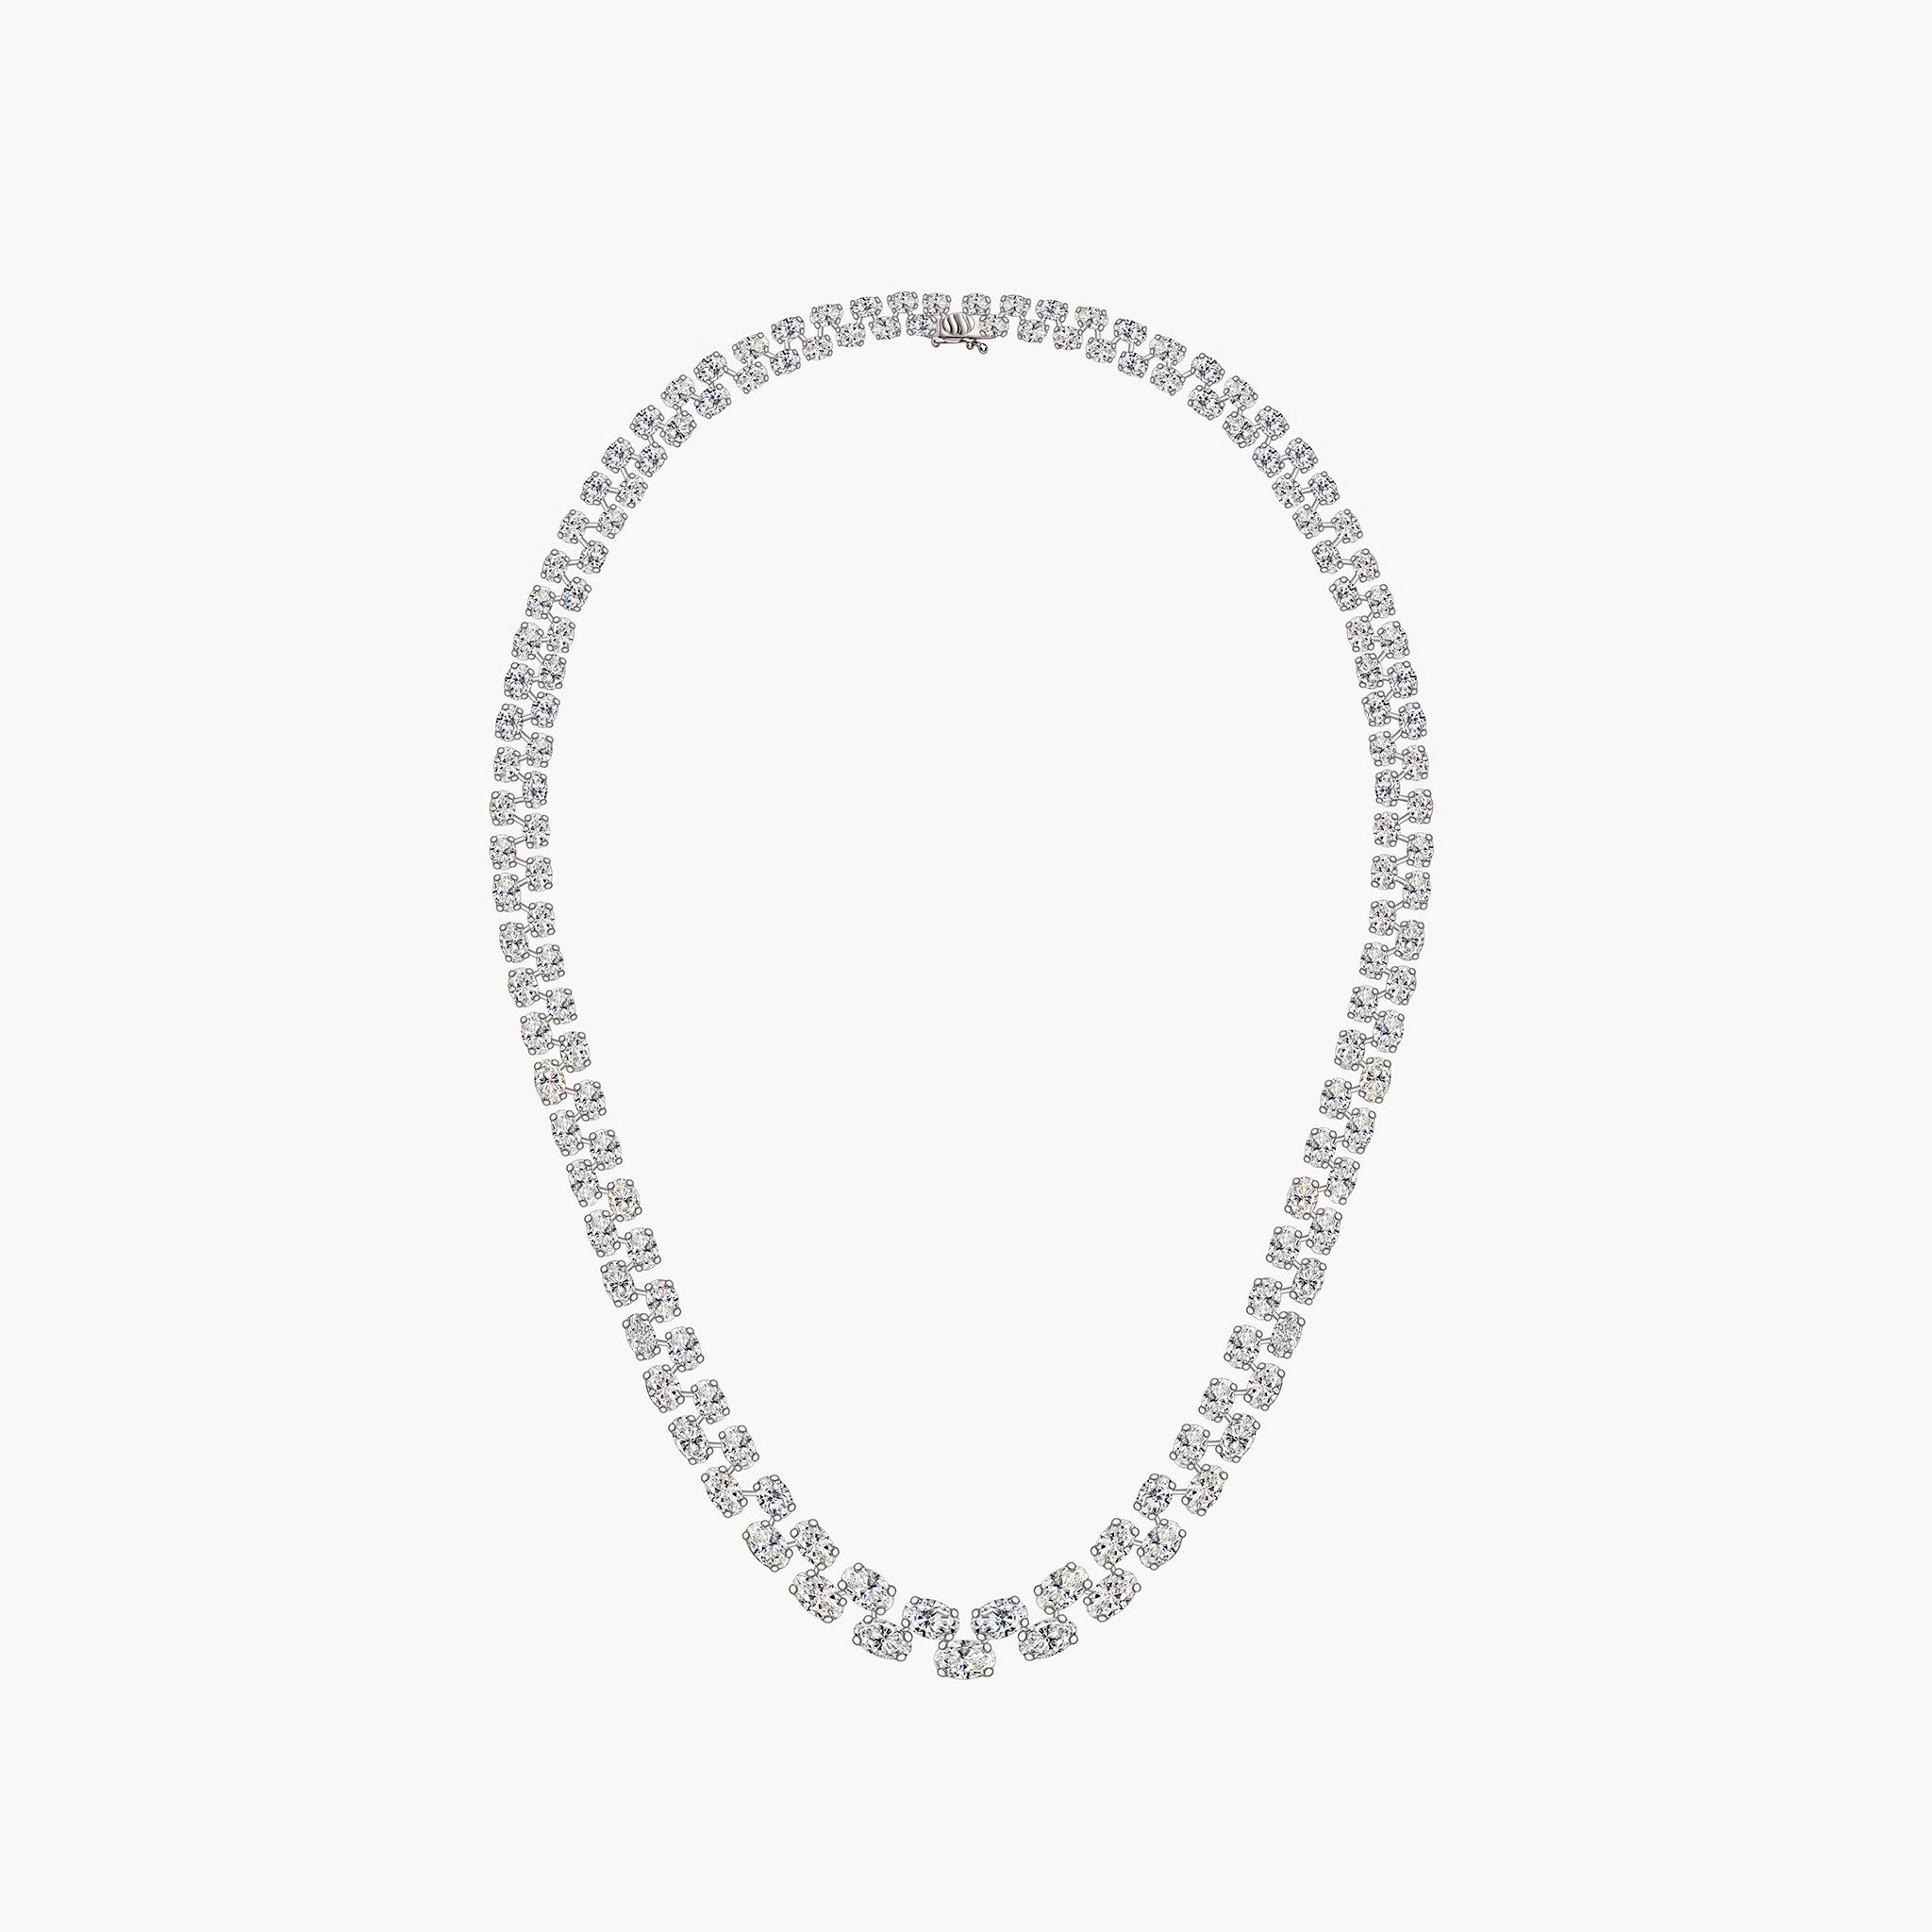 Two-Row Graduated Oval Diamond Necklace